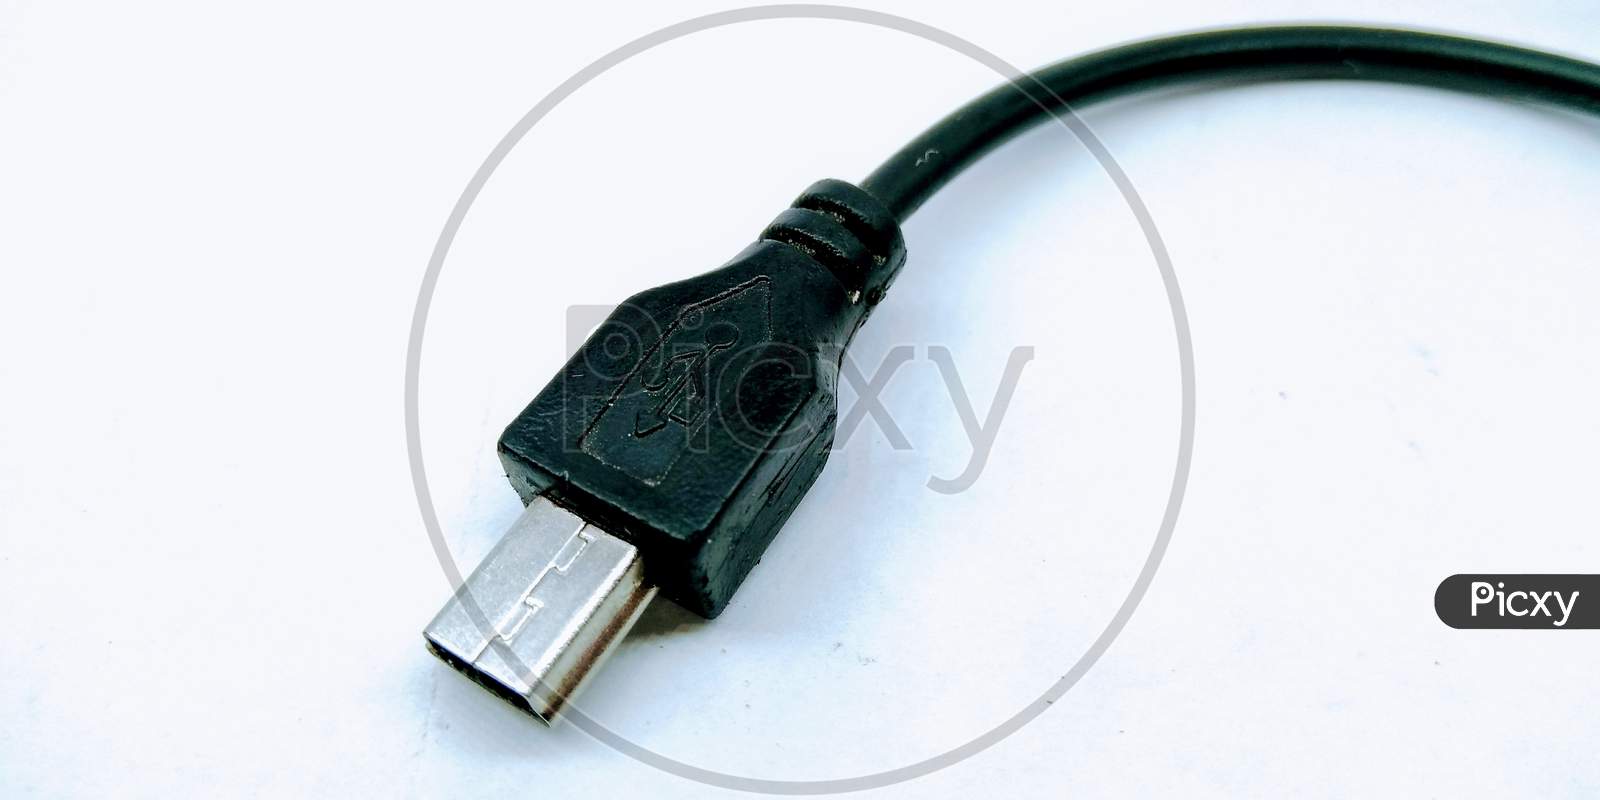 USB Mobile Charger Connector on White Background